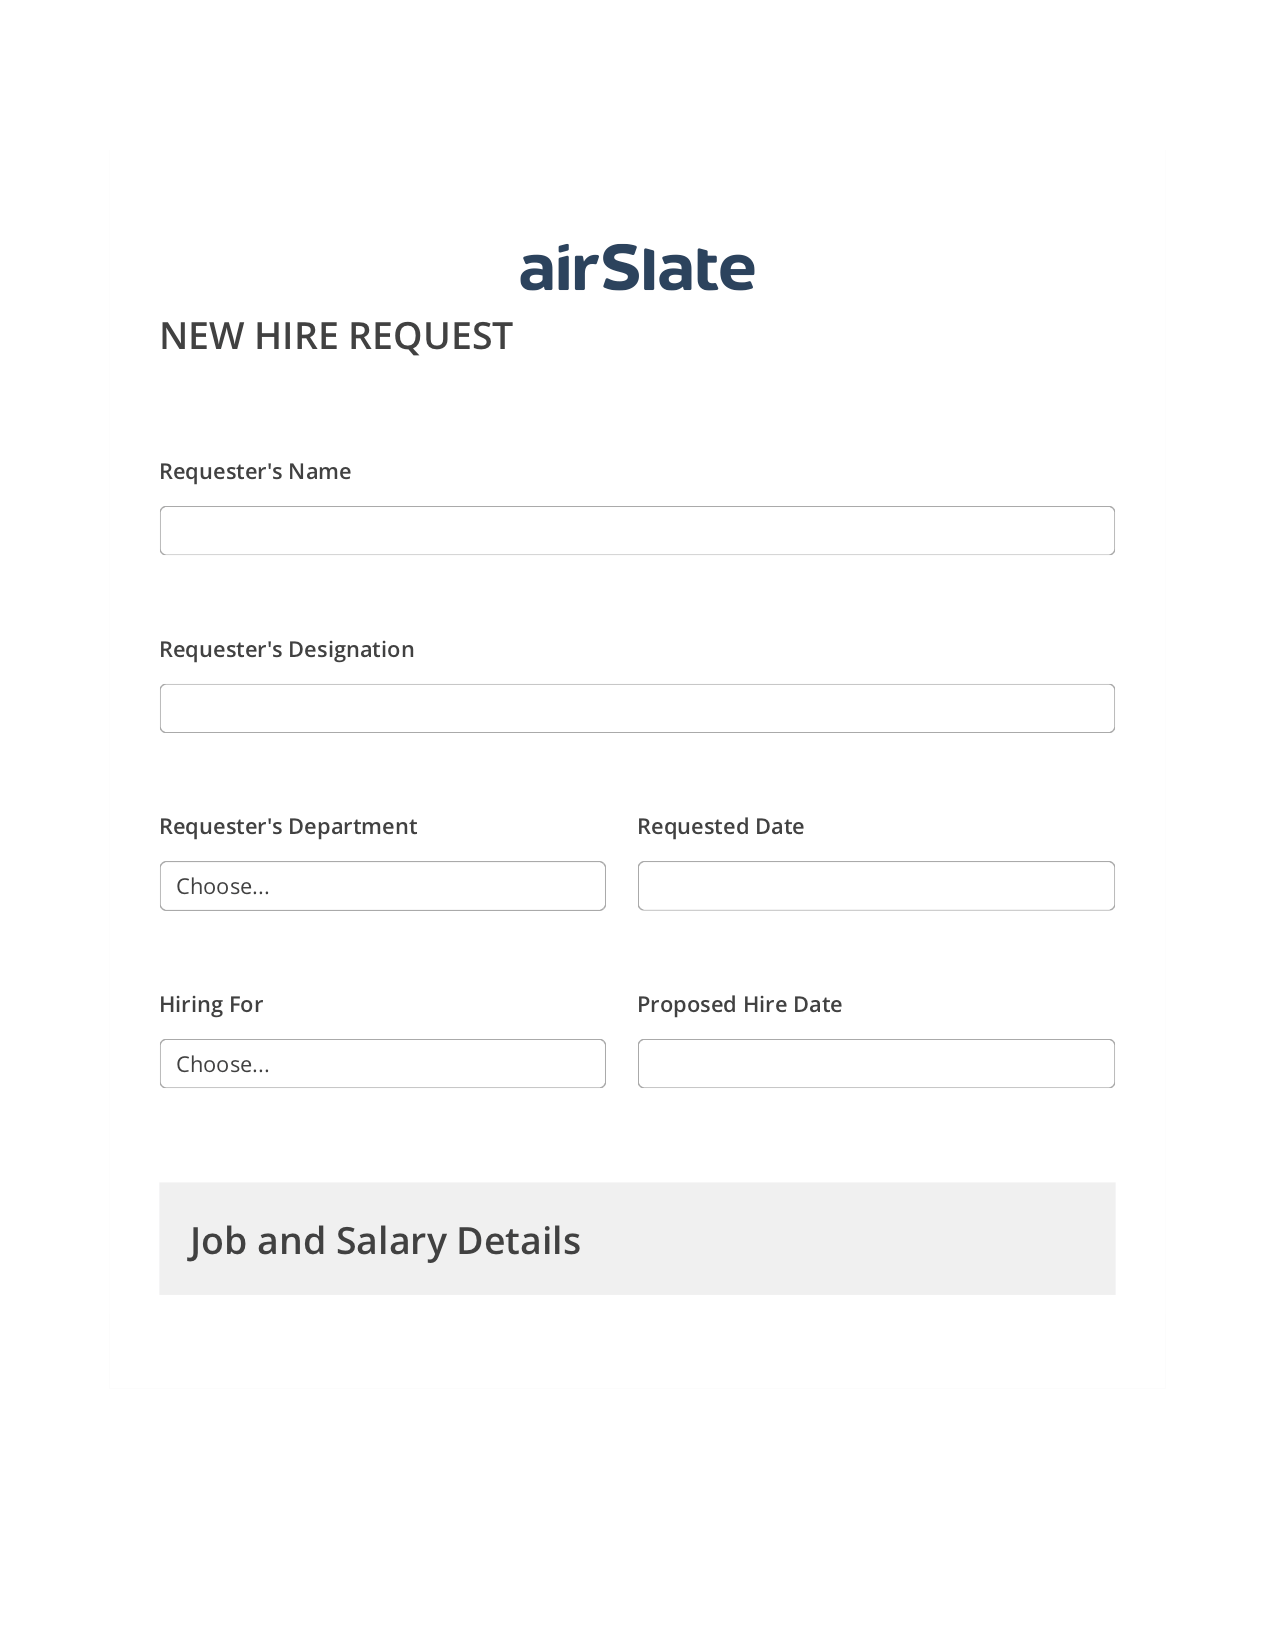 Hiring Request Workflow Pre-fill from Excel Spreadsheet Bot, Create slate addon, Export to MySQL Bot